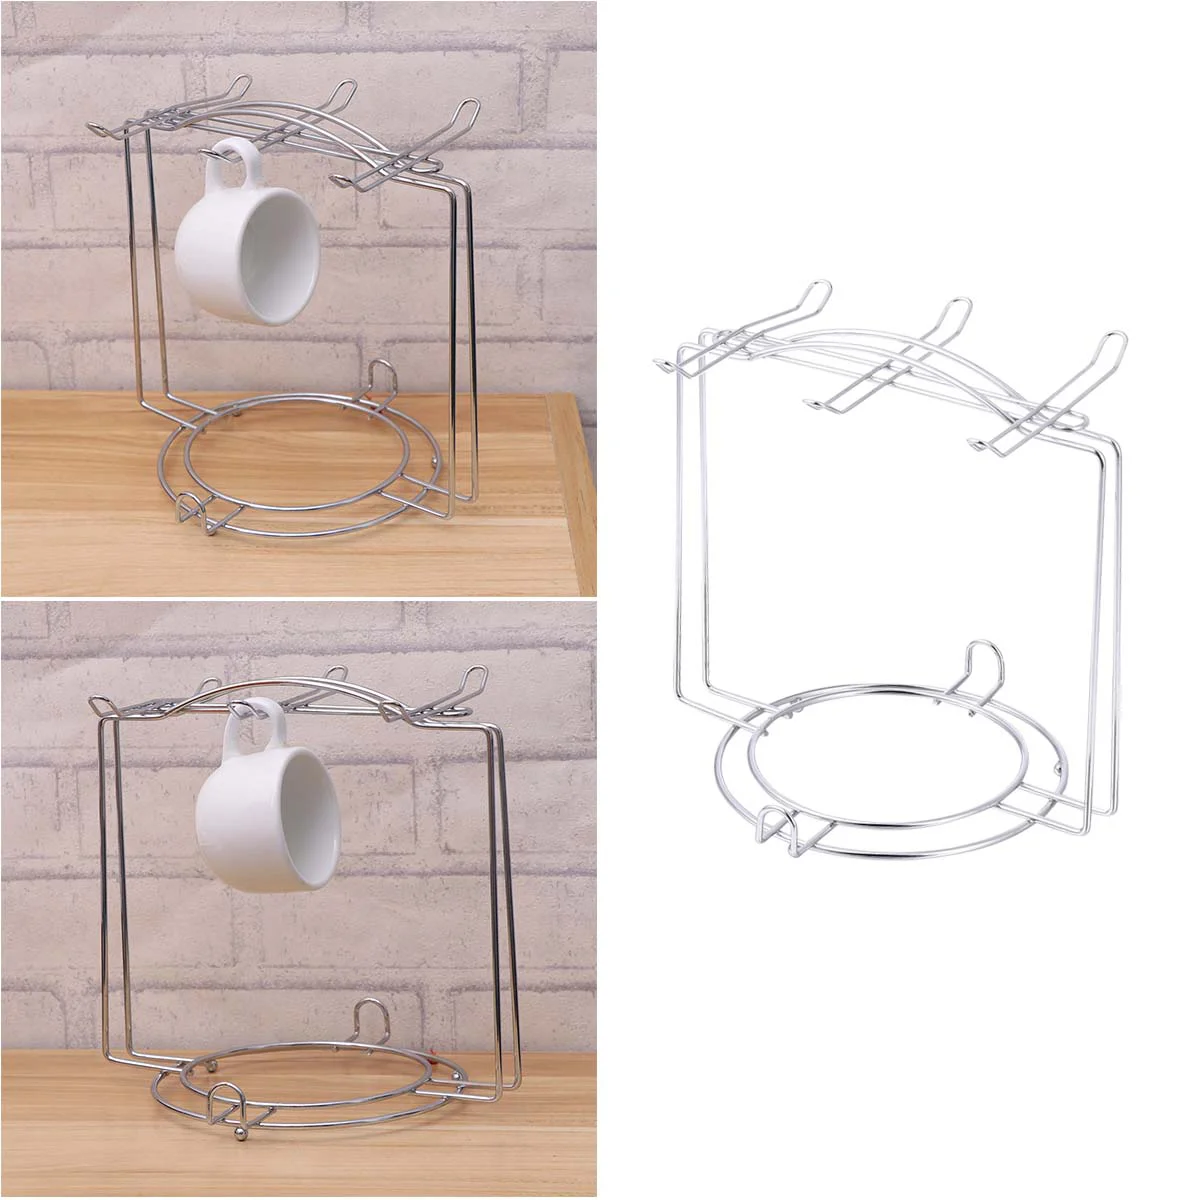 

Holder Cup Coffee Mug Rack Dishes Stainless Drying Countertop Steel Storage Tree Shelf Organizer Stand Counter Drainer Hanger